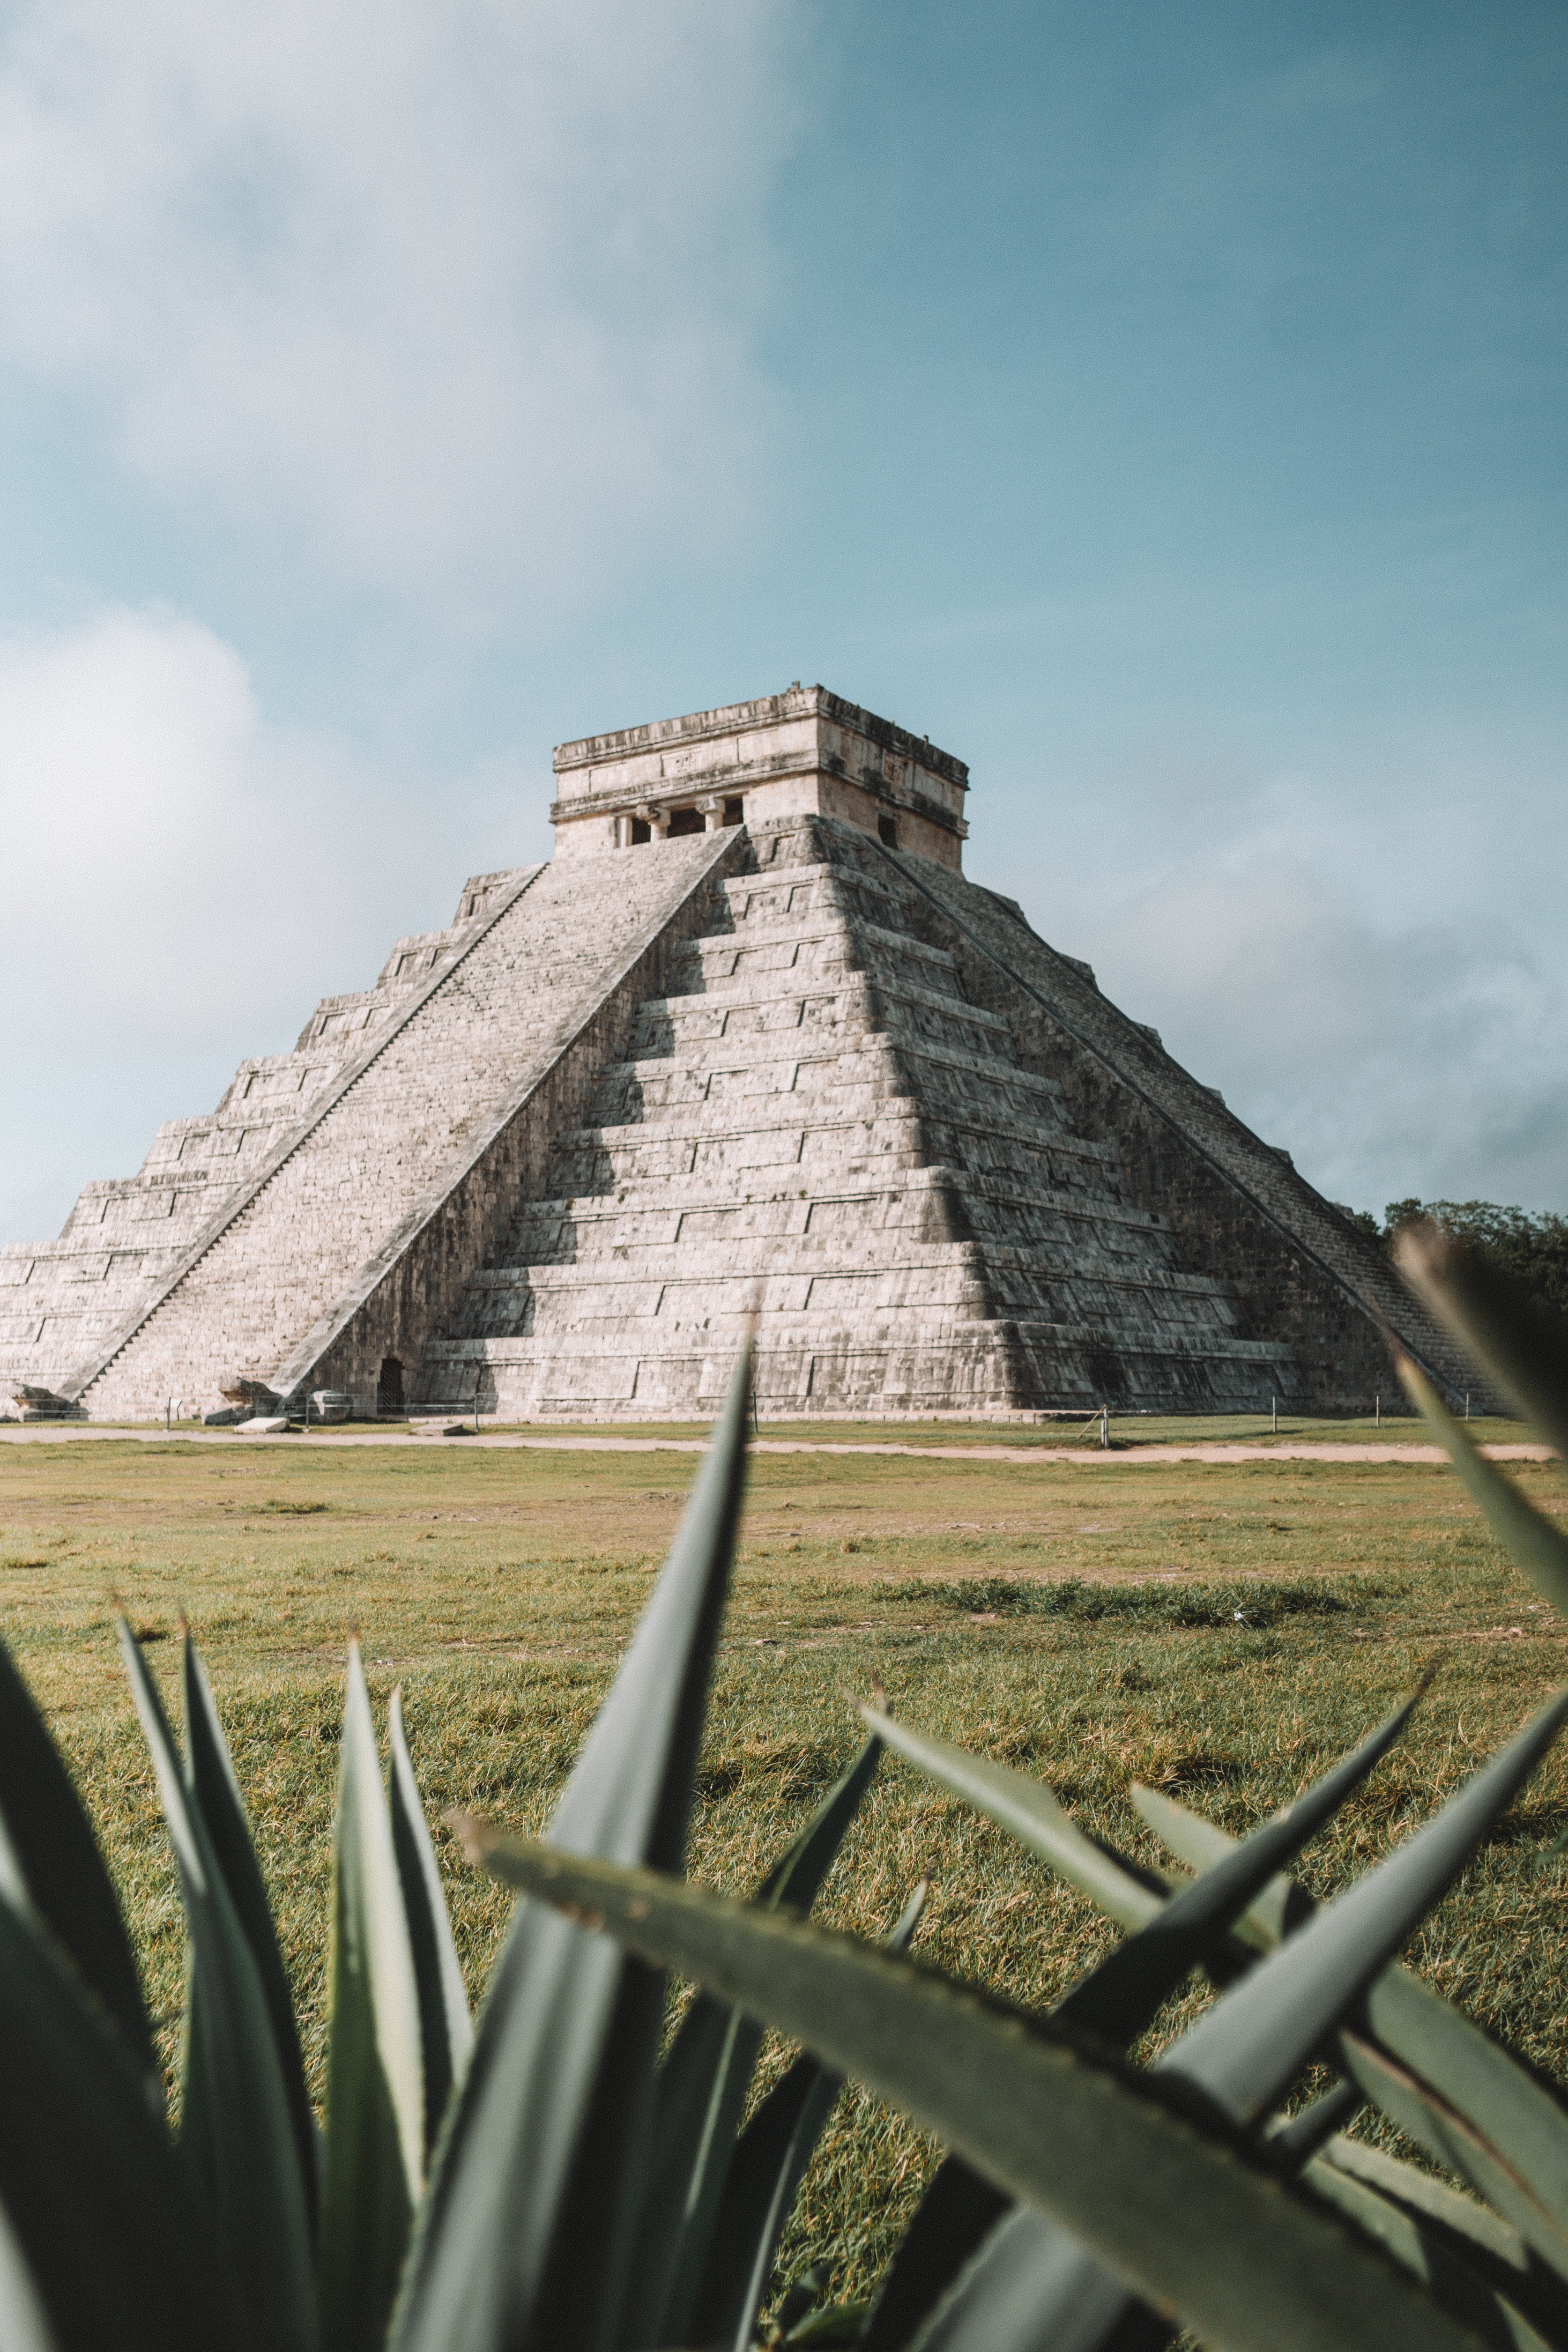 Mayan Temple. Photo by Alex Azabache from Pexels